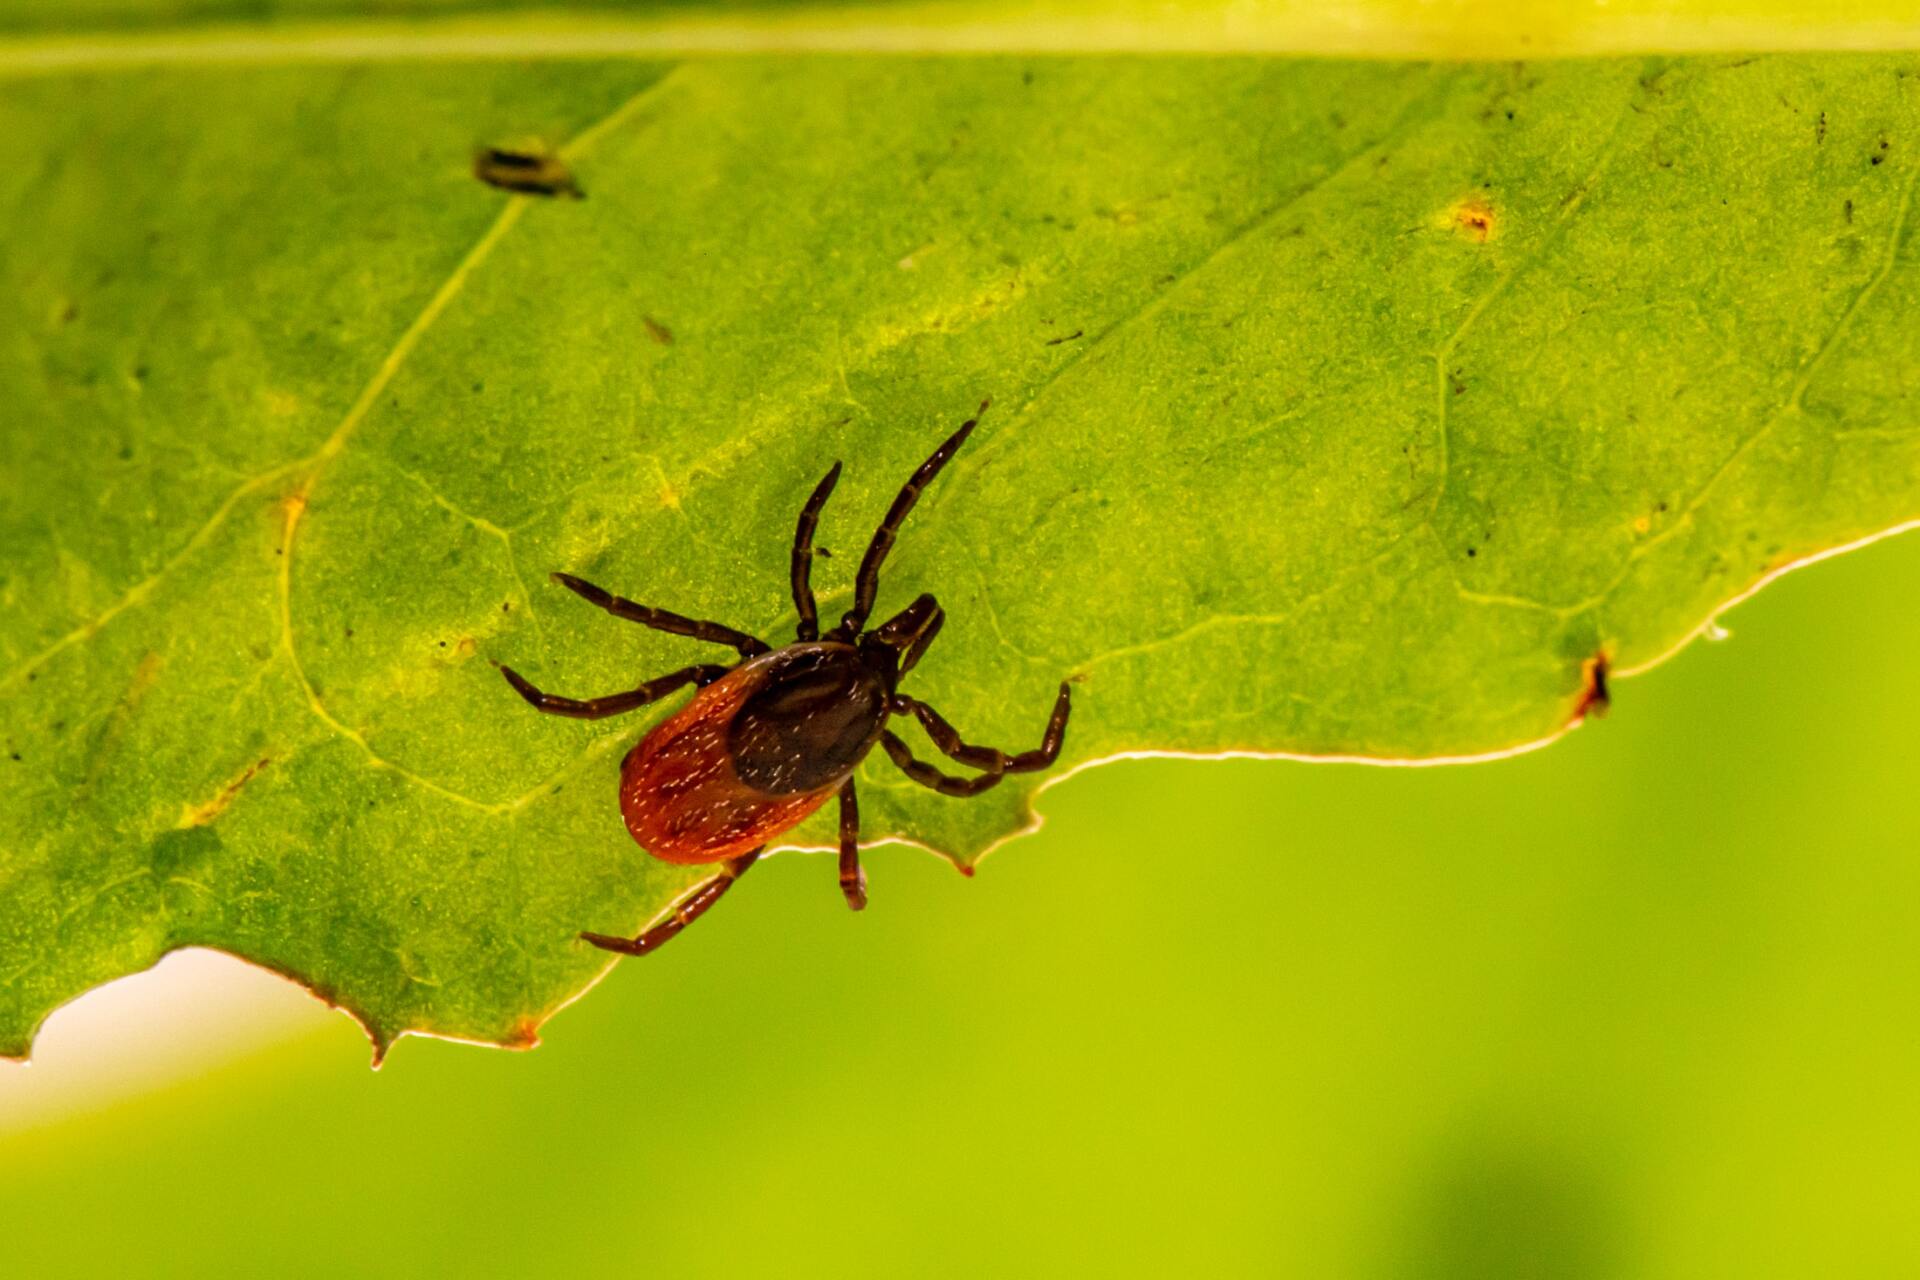 Lyme disease can cause finger numbness, just like carpal tunnel syndrome.